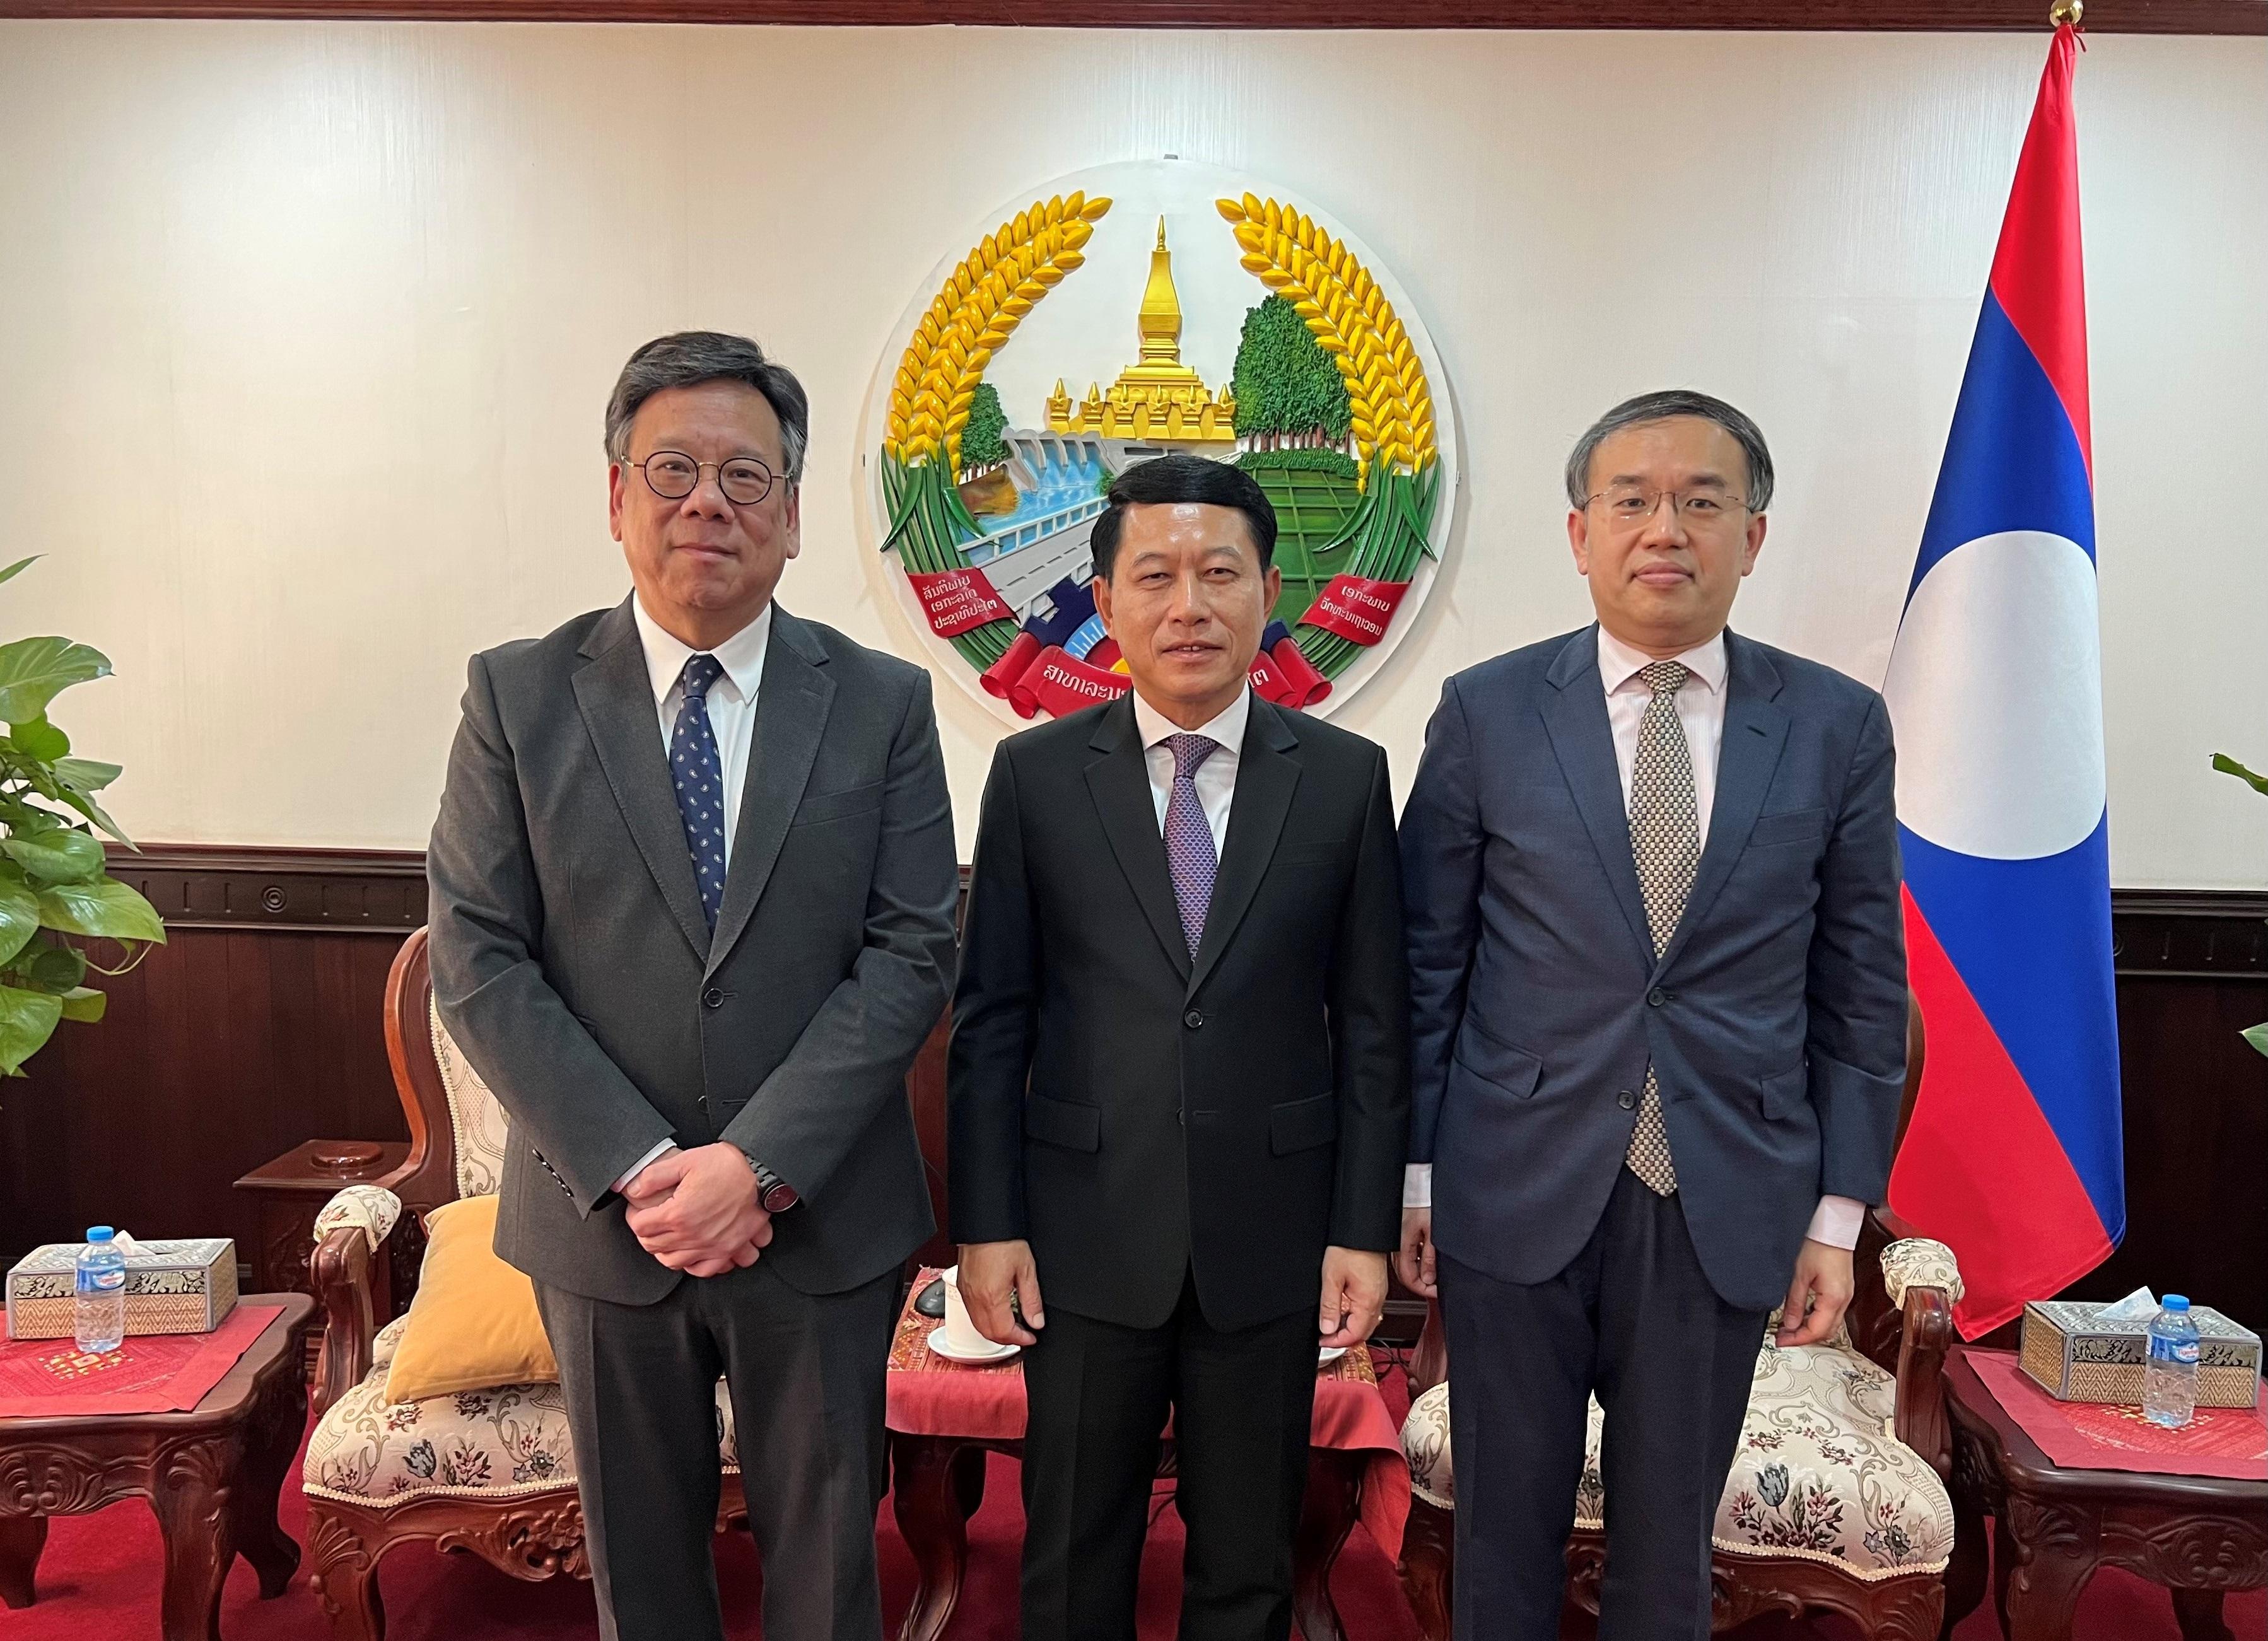 The Secretary for Financial Services and the Treasury, Mr Christopher Hui (right), and the Secretary for Commerce and Economic Development, Mr Algernon Yau (left), meet with the Minister of Foreign Affairs of Laos, Mr Saleumxay Kommasith (centre), in Vientiane, Laos today (December 11) to discuss issues of mutual concern.